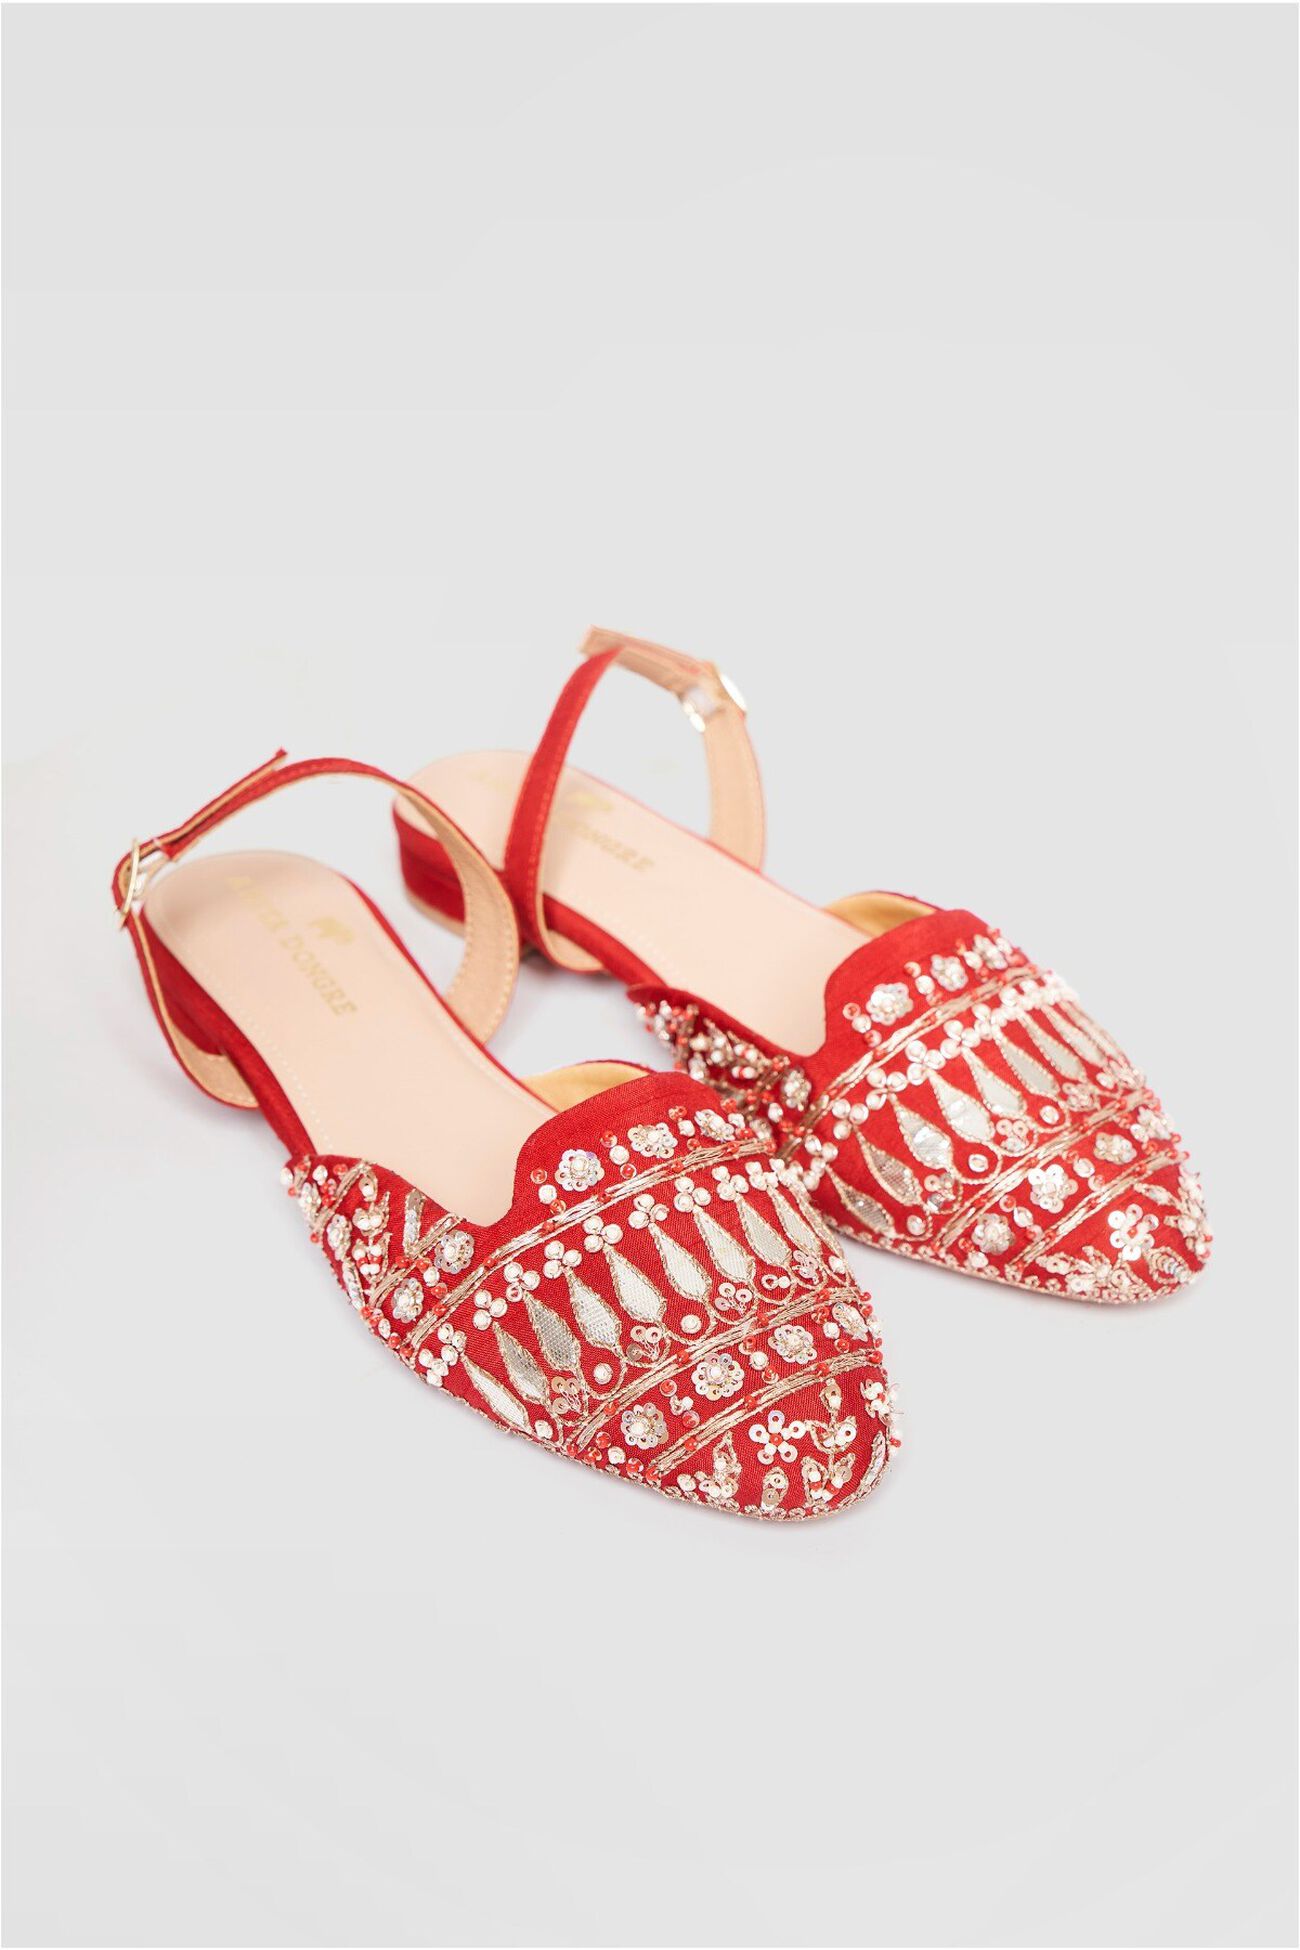 1 - Chinnar Sling-Back Mules - Red, image 1